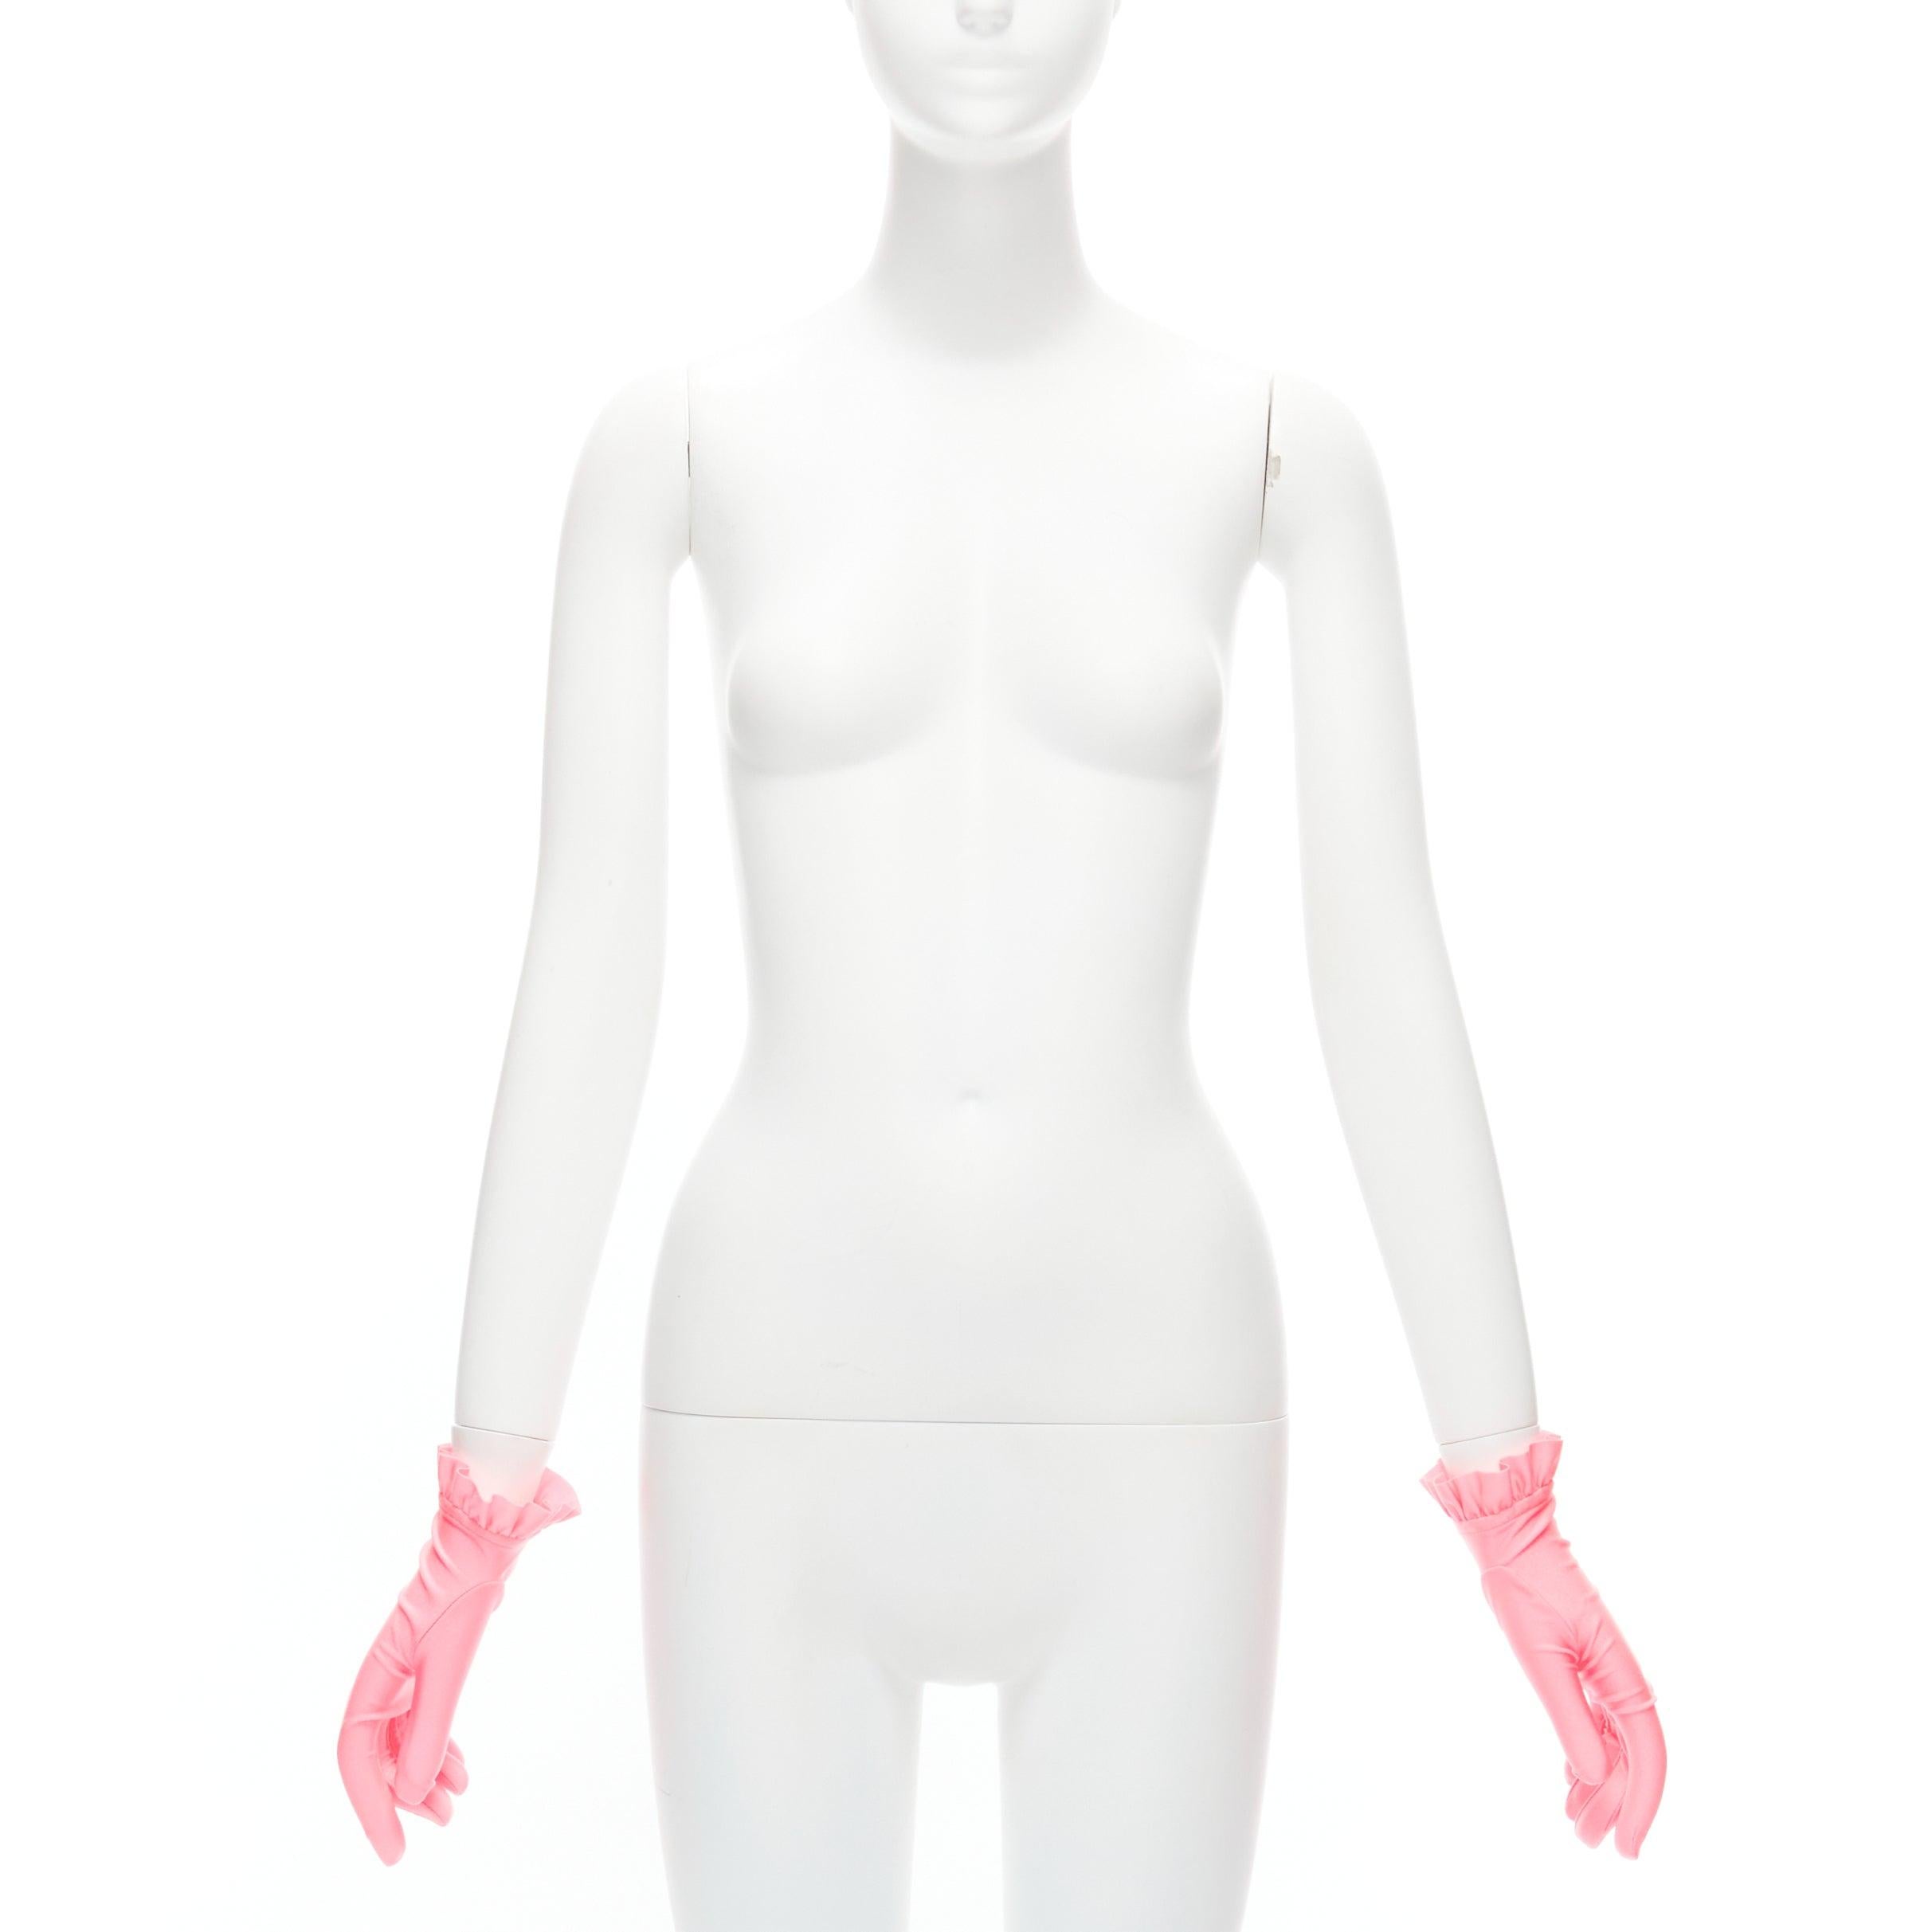 BALENCIAGA Demna shiny pink lycra ruffle edge short gloves
Reference: BSHW/A00128
Brand: Balenciaga
Designer: Demna
Material: Polyamide, Blend
Color: Pink
Pattern: Solid
Closure: Pull On
Lining: Pink Fabric
Made in: Italy

CONDITION:
Condition: